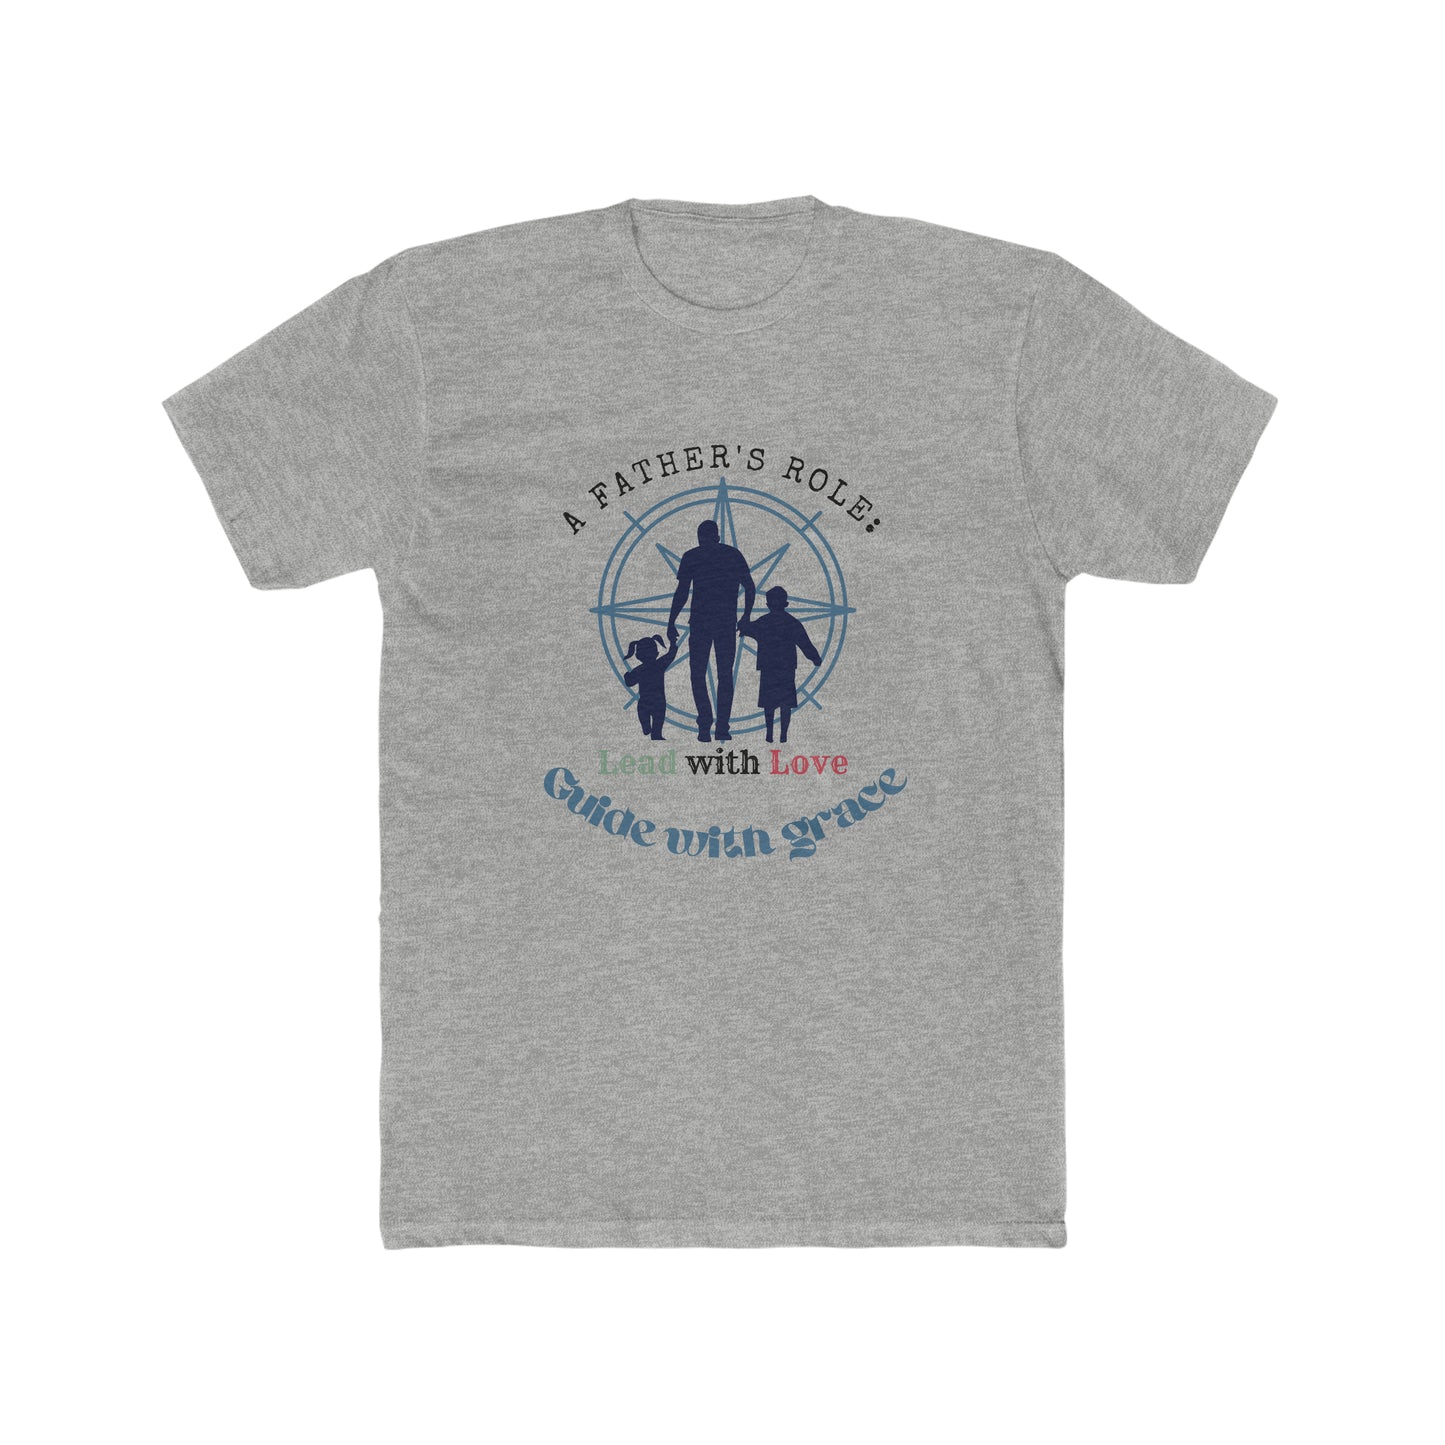 A Father's Role T Shirt for Father's